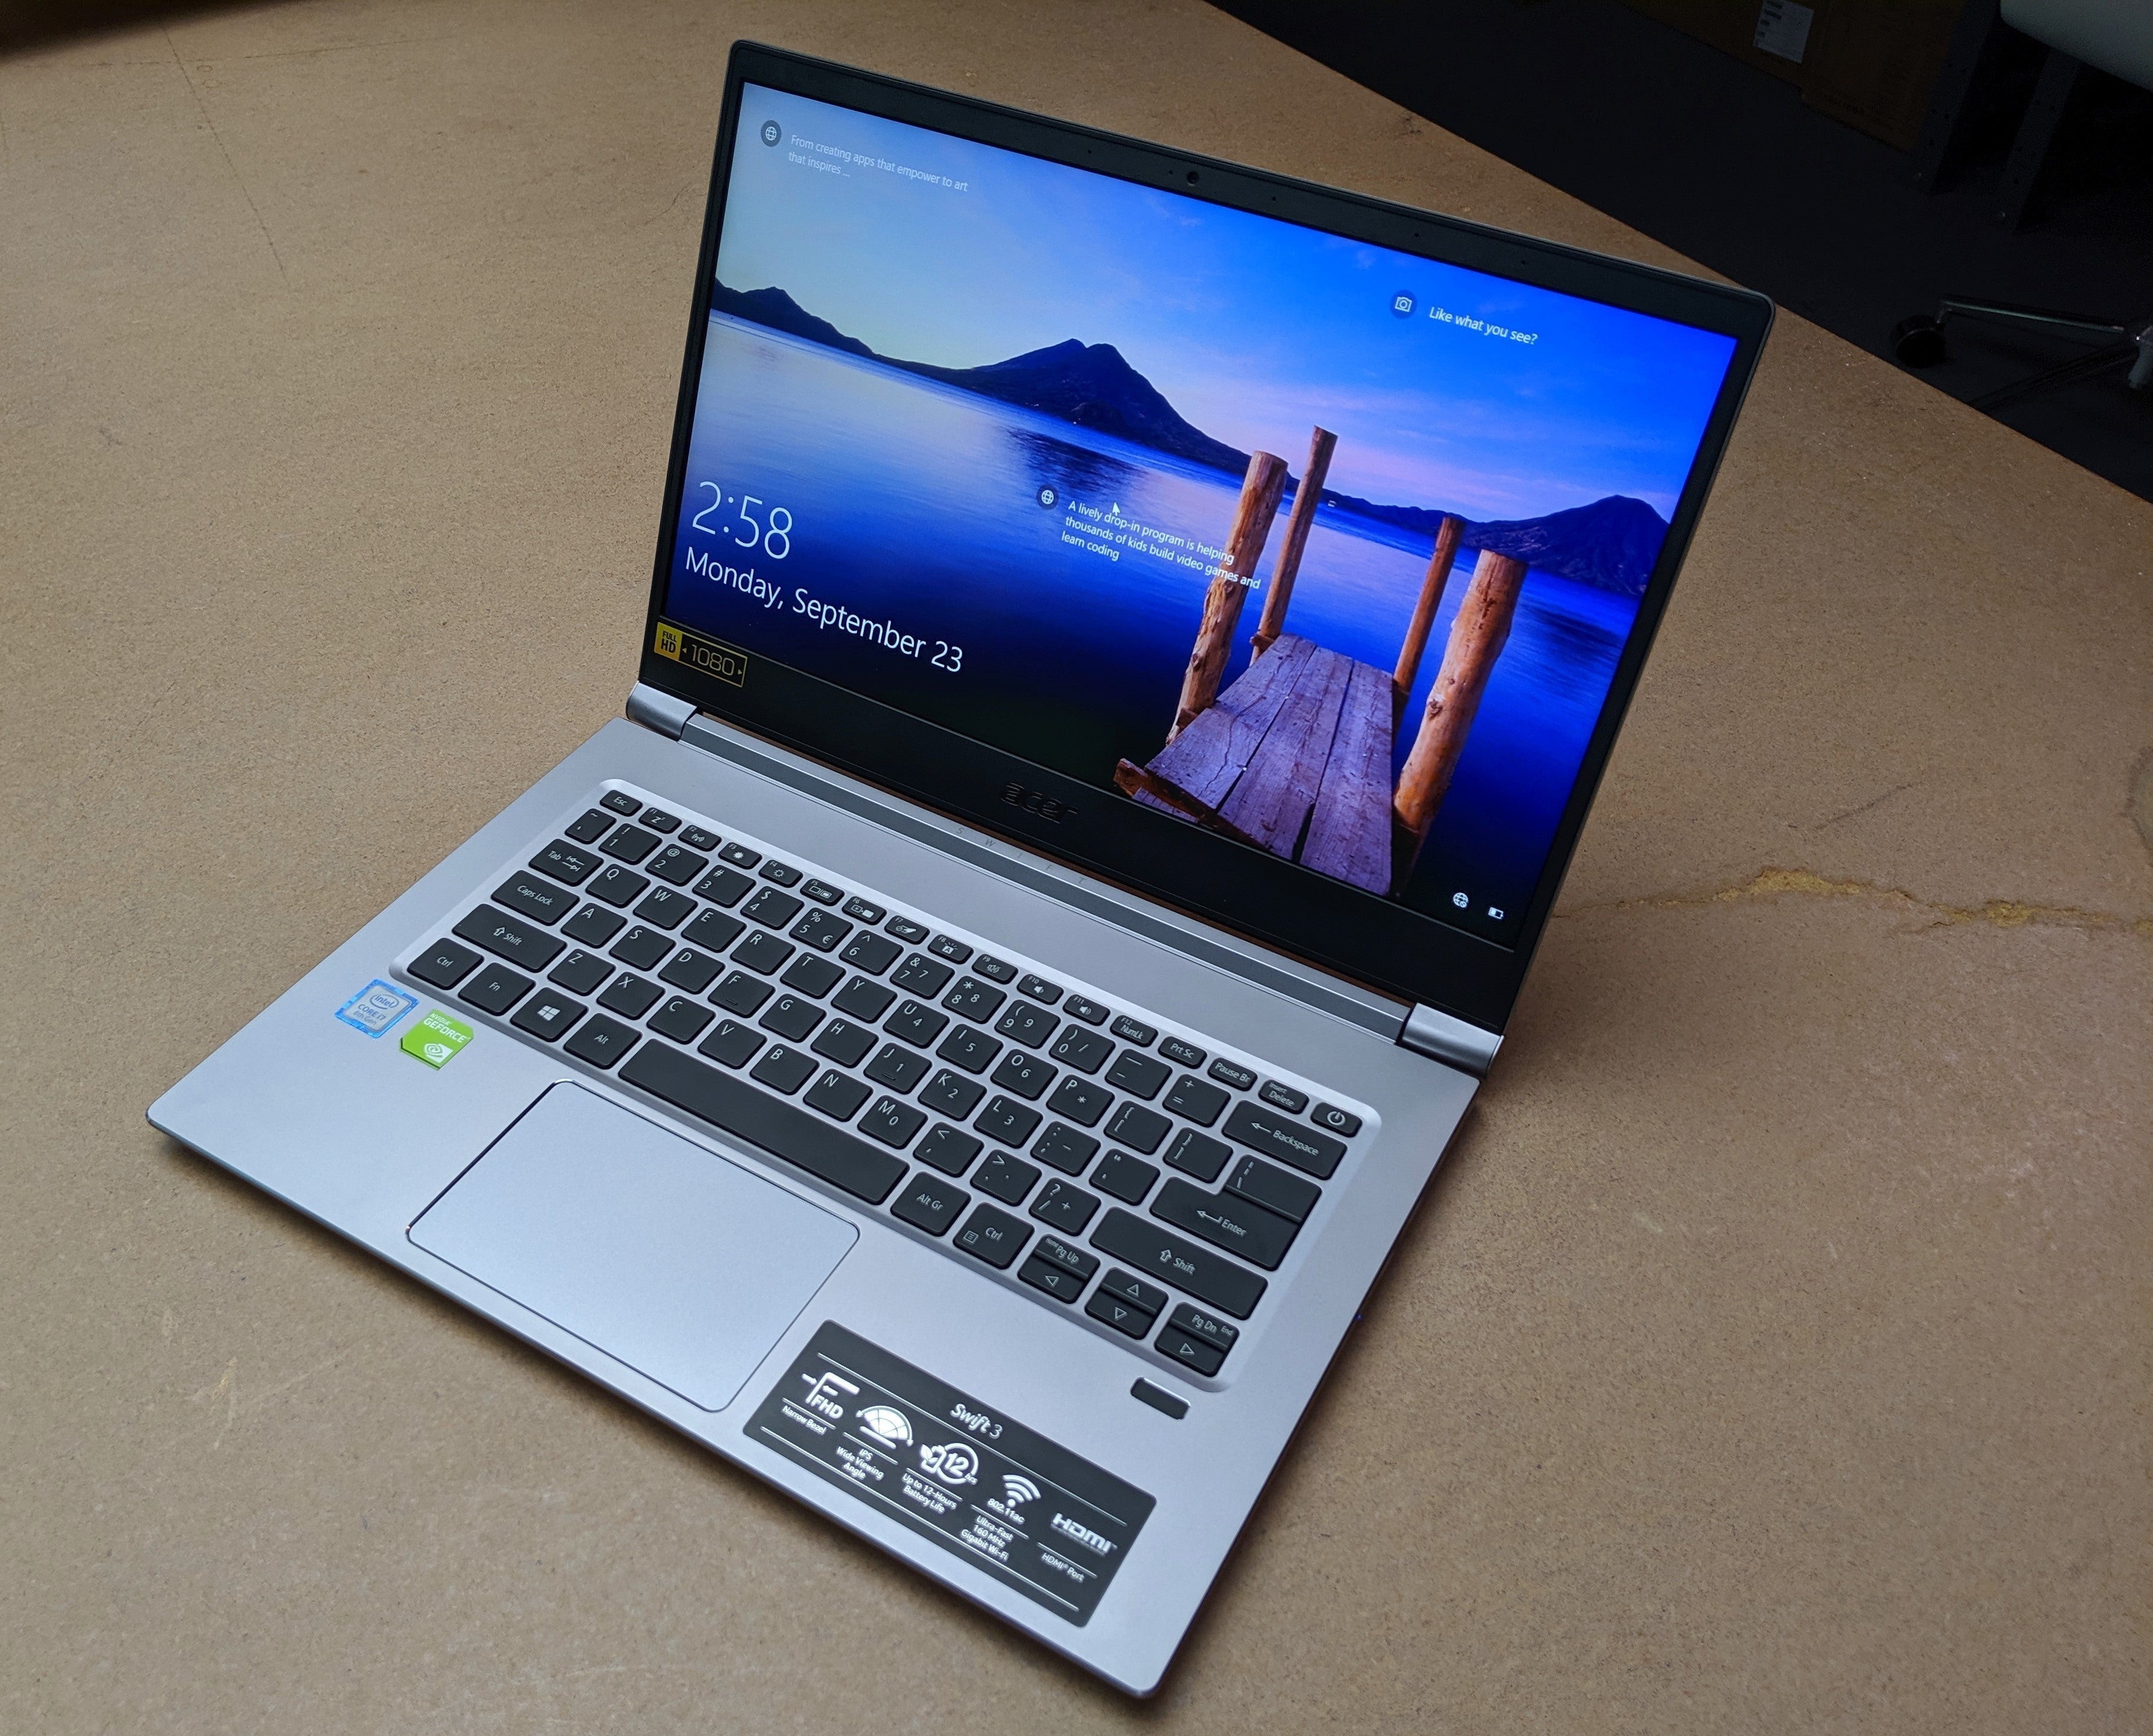 Acer Swift 3 (2019) review: This midrange notebook PC hides Nvidia